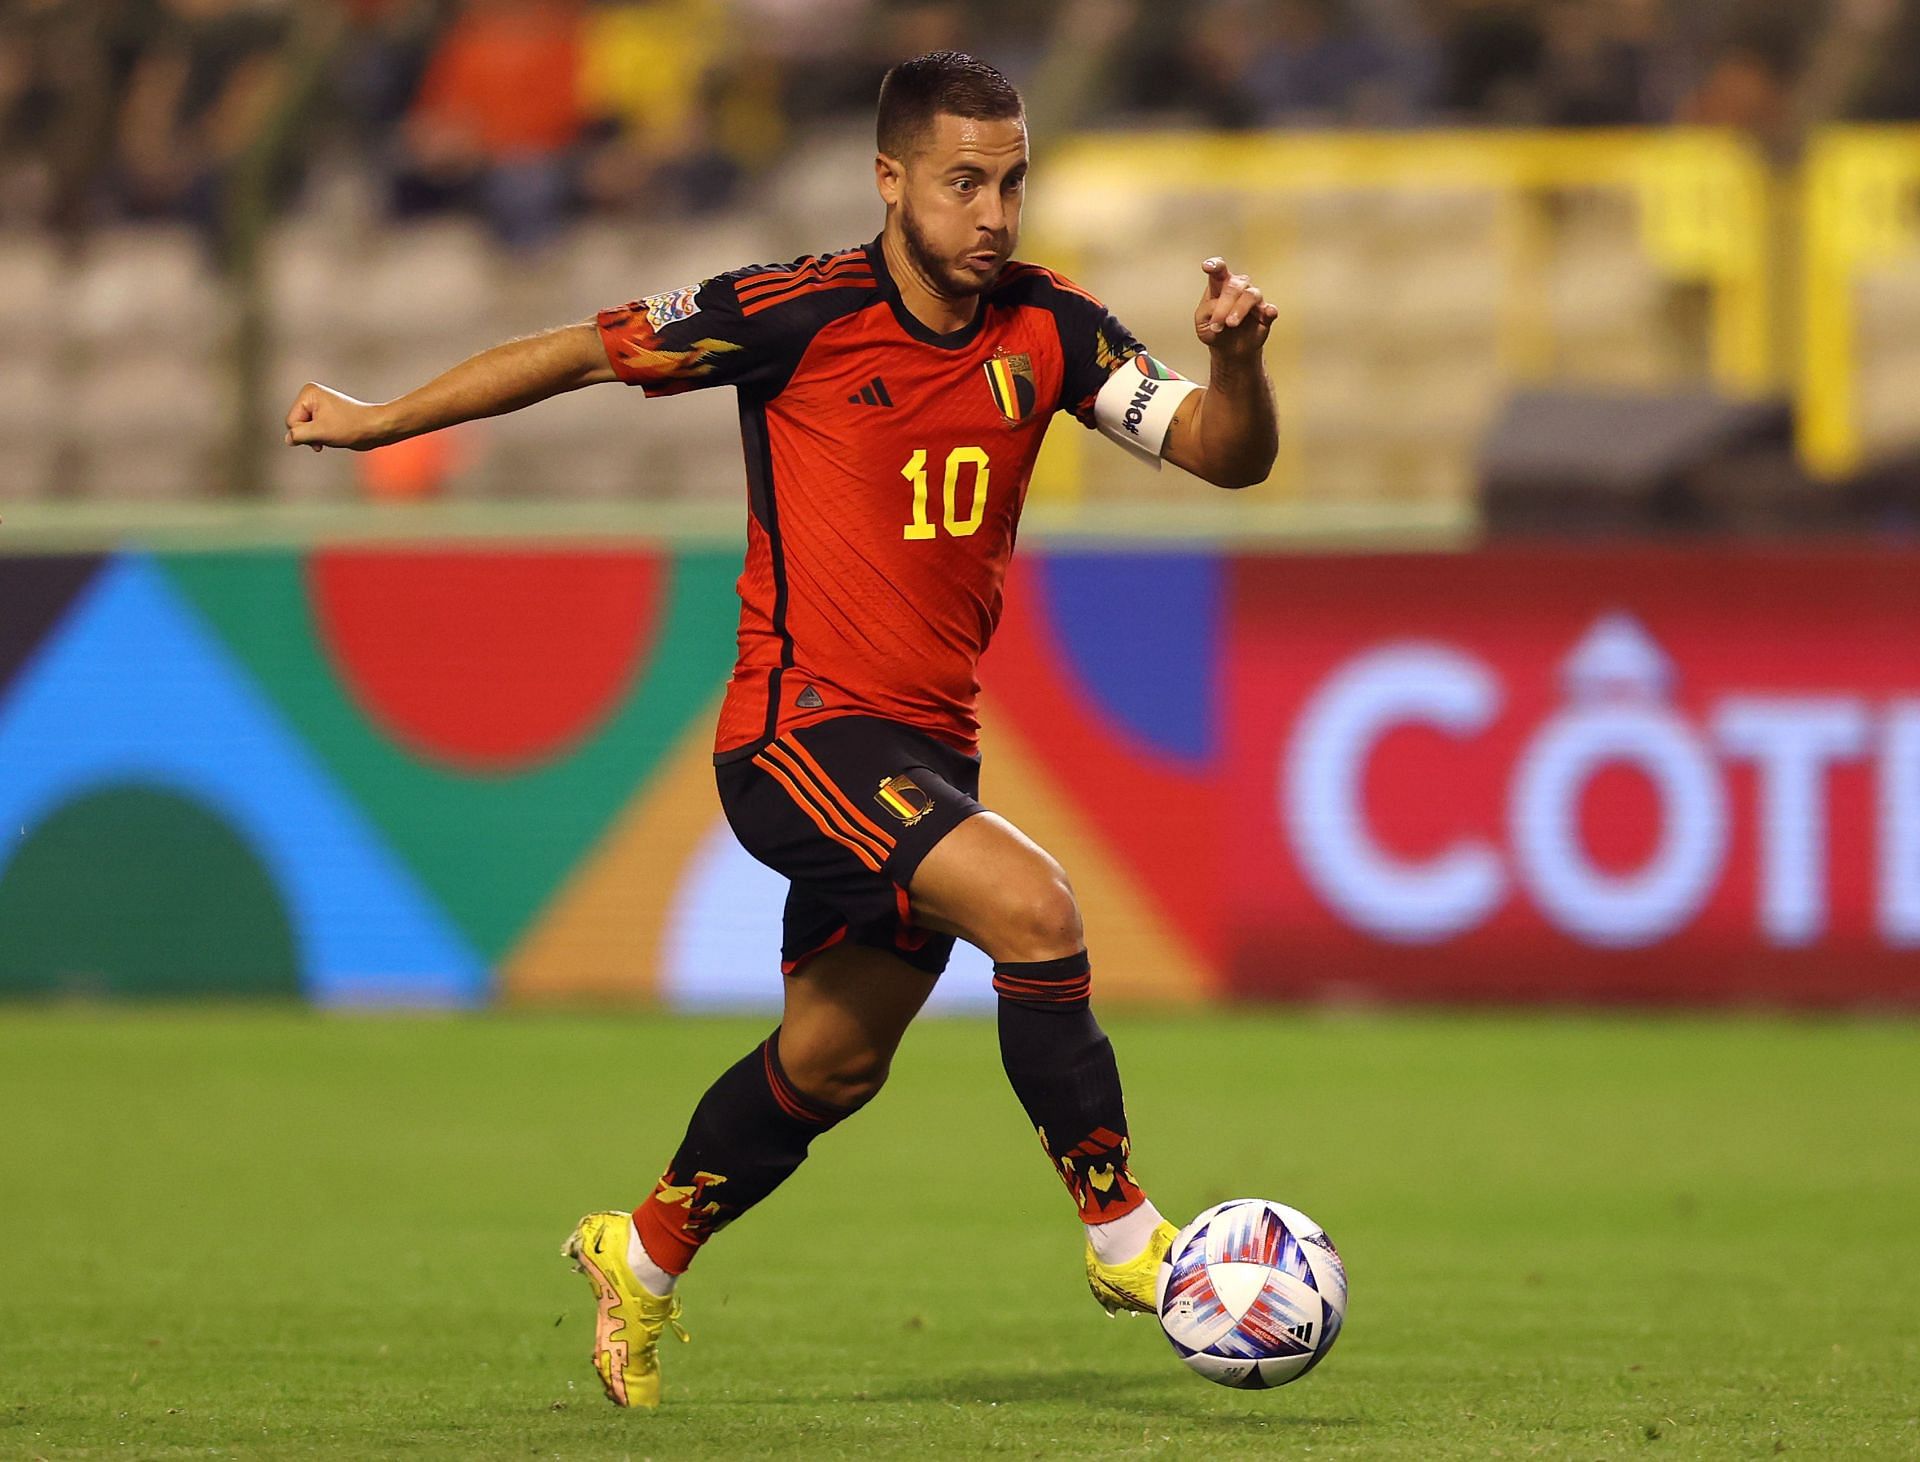 The Real Madrid forward will captain Belgium in the competition this year.